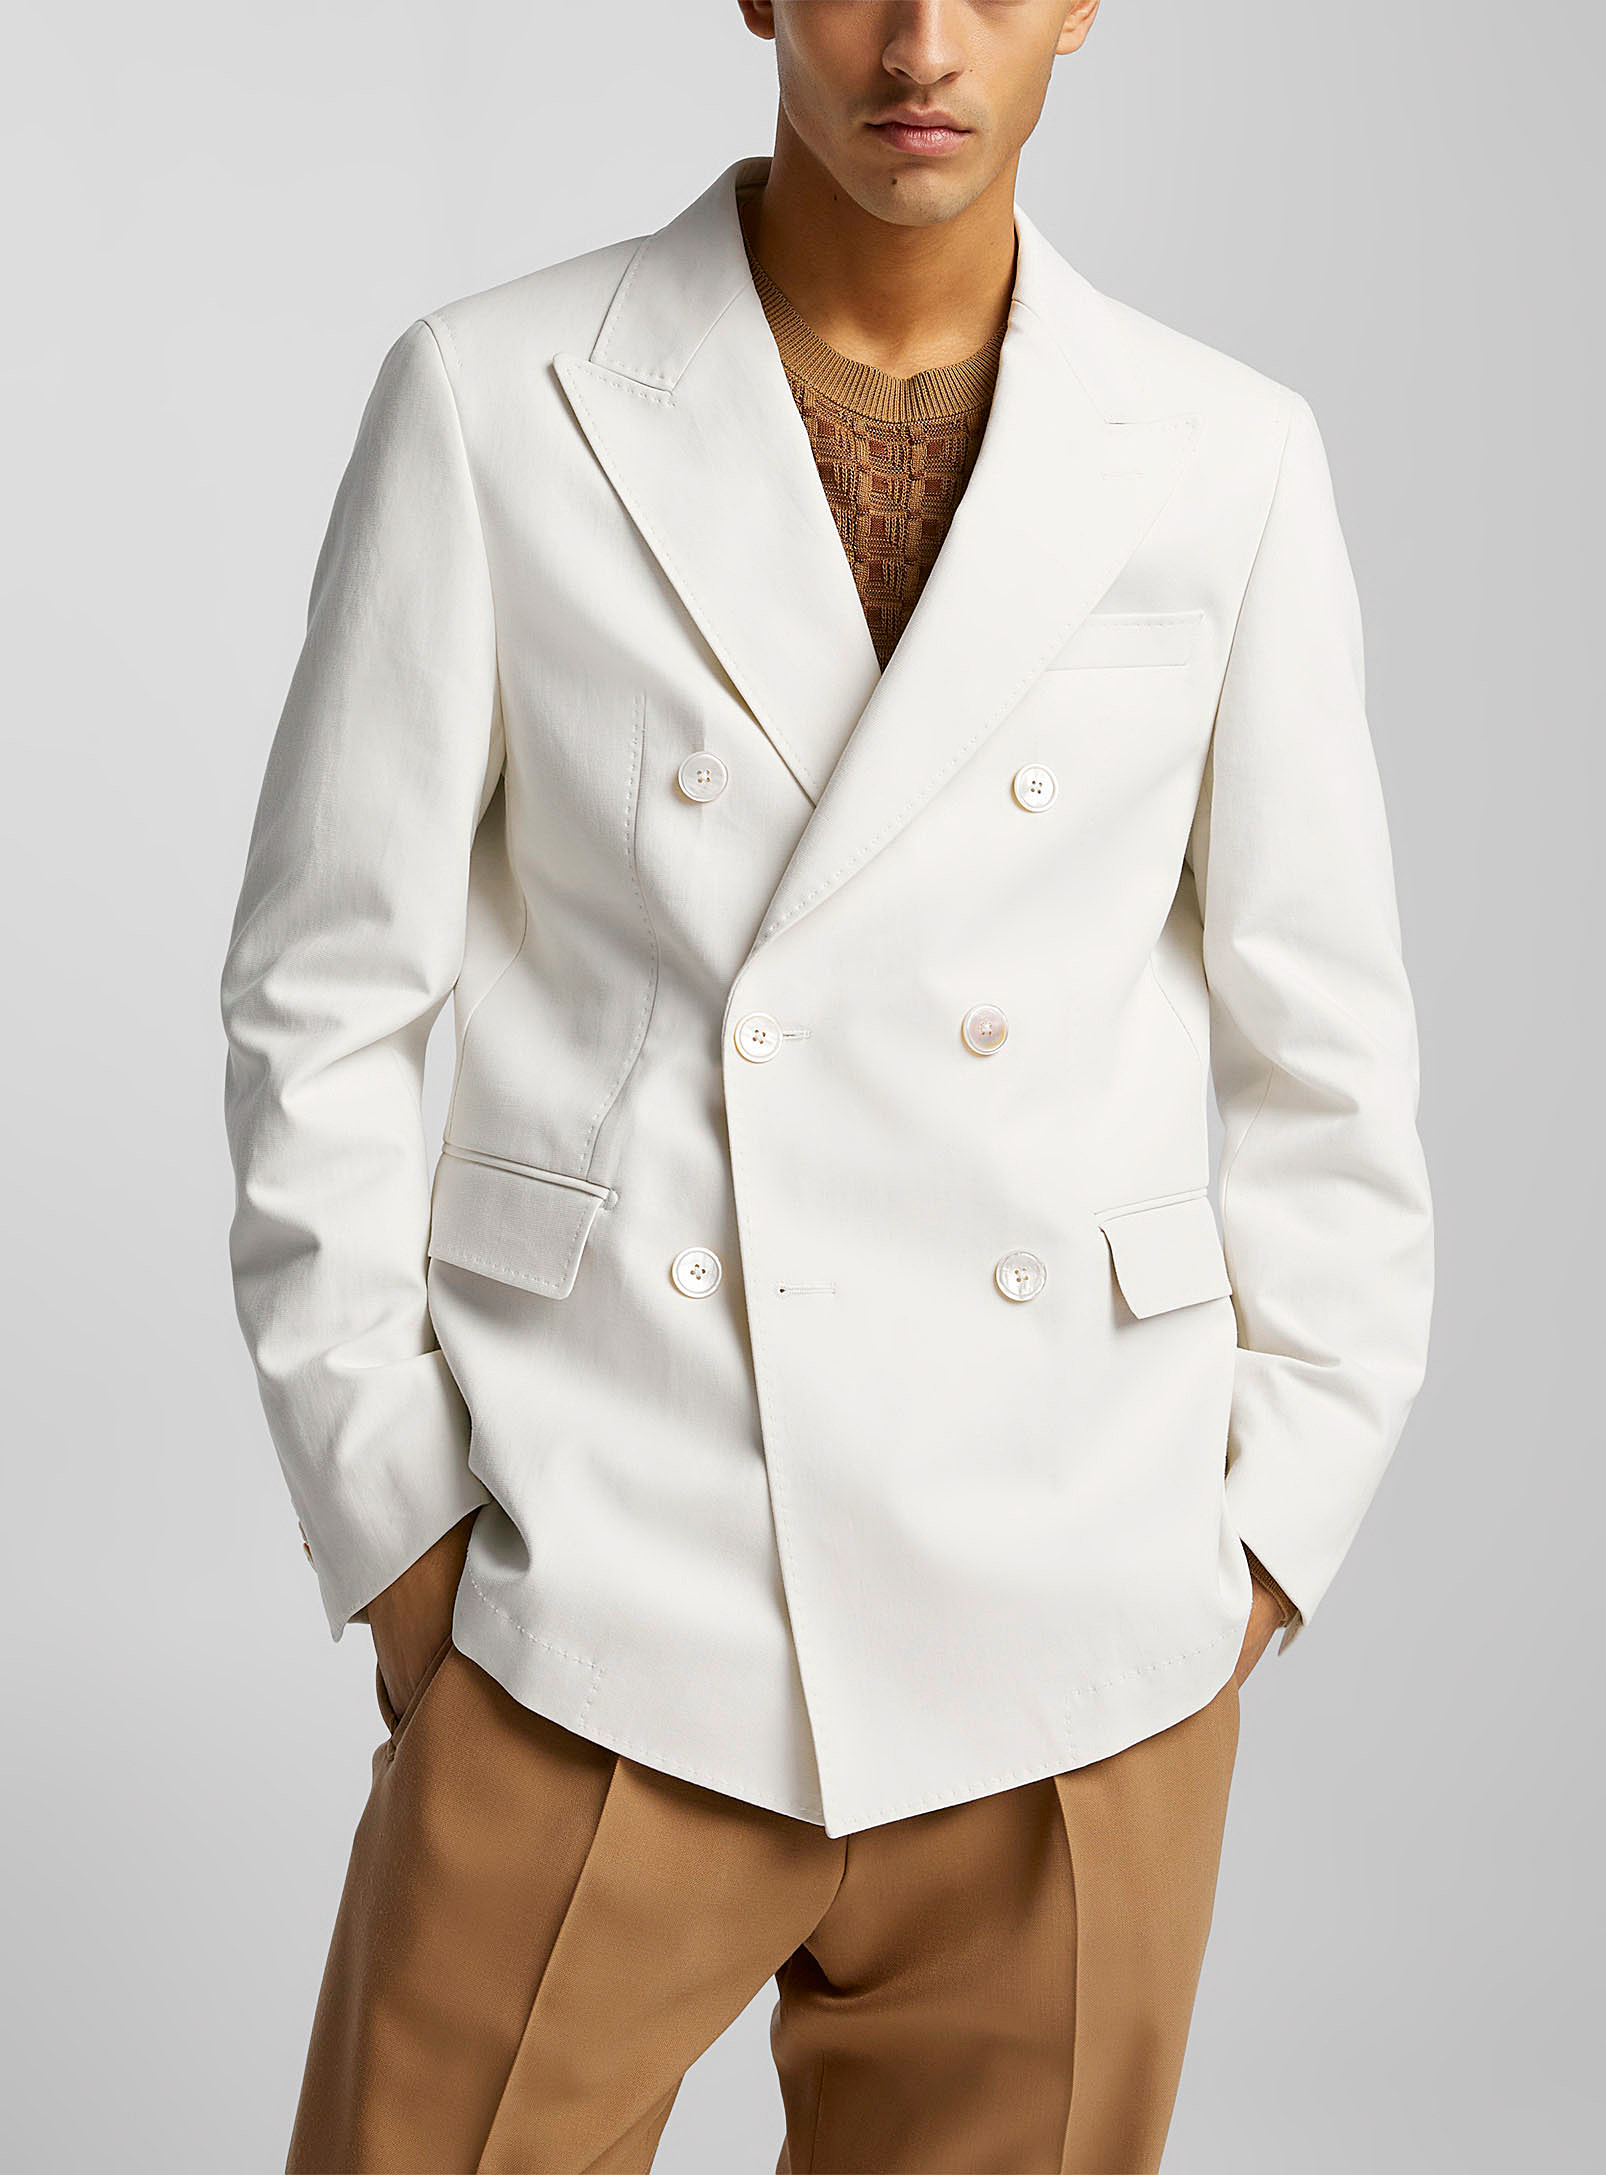 Hugo Boss Double-breasted Cotton Blazer In Ivory White